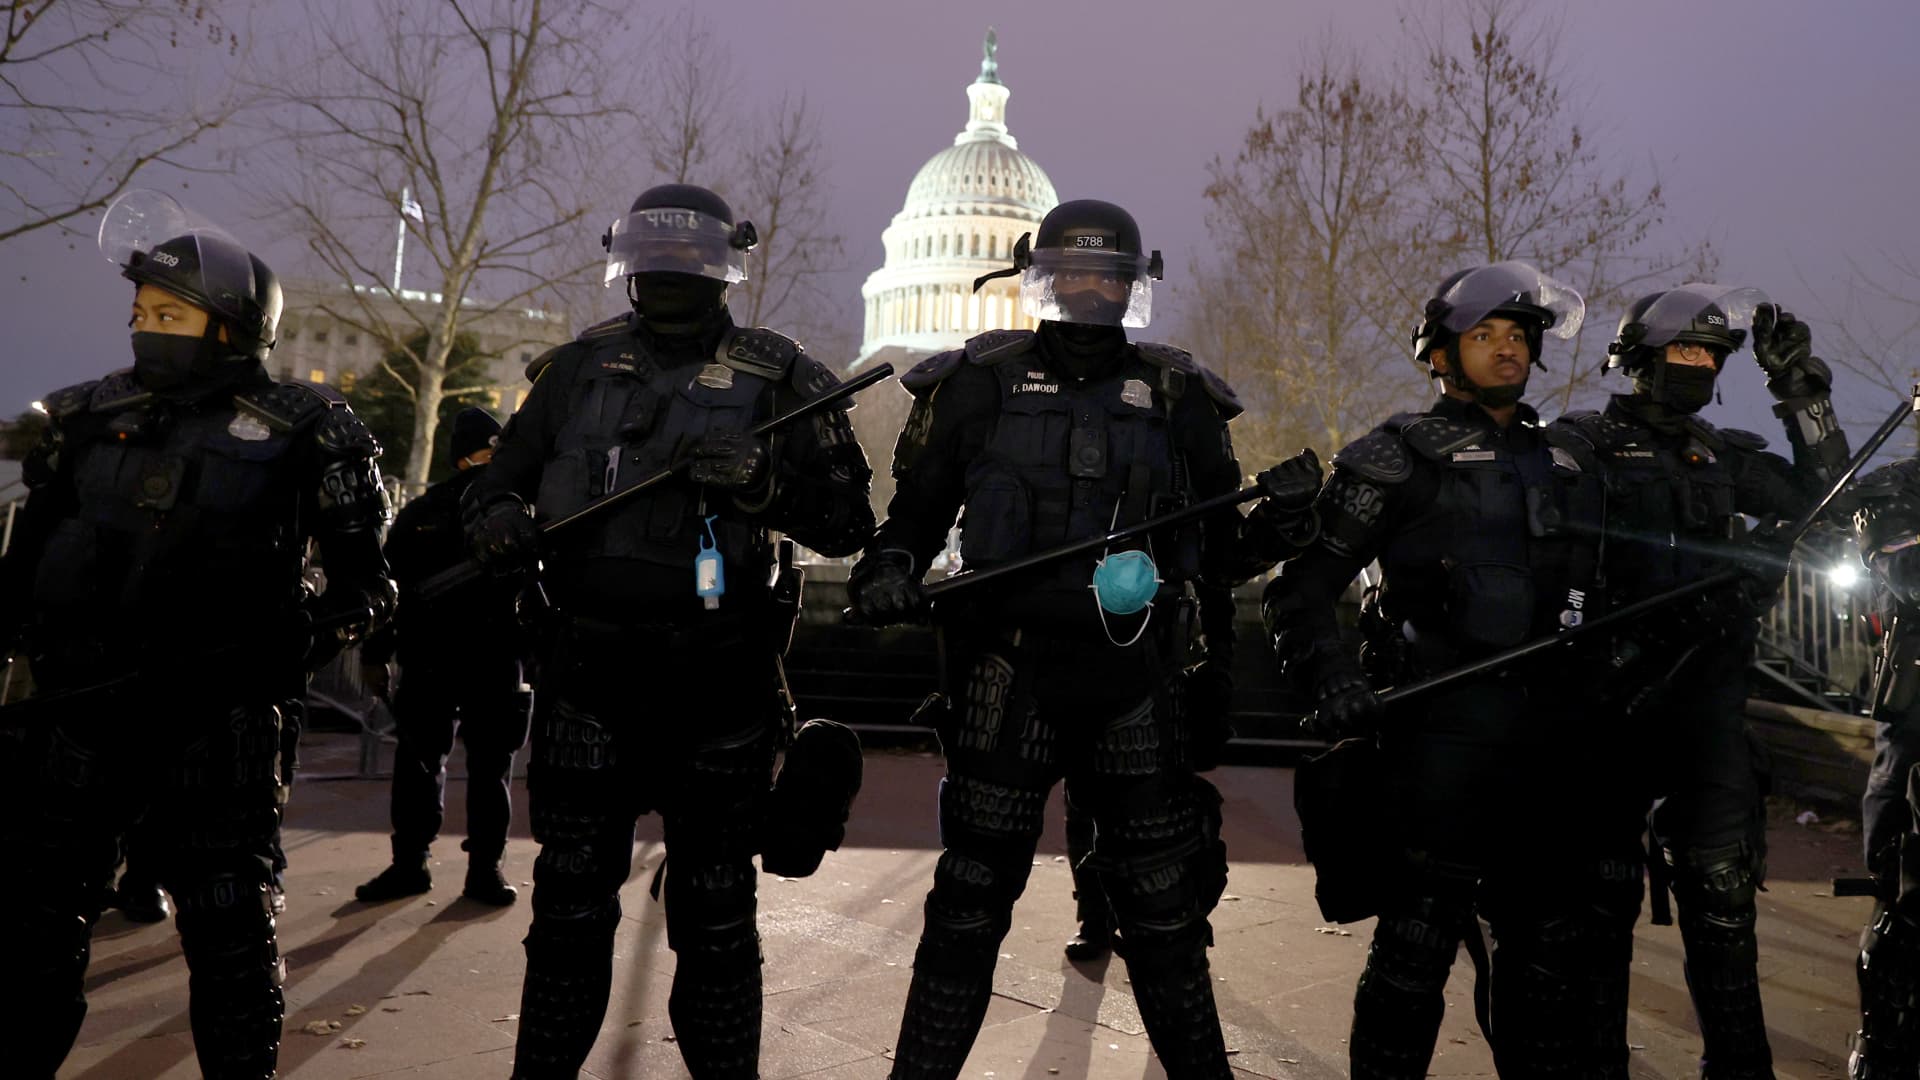 Police officers in riot gear line up as protesters gather on the U.S. Capitol Building on January 06, 2021 in Washington, DC.